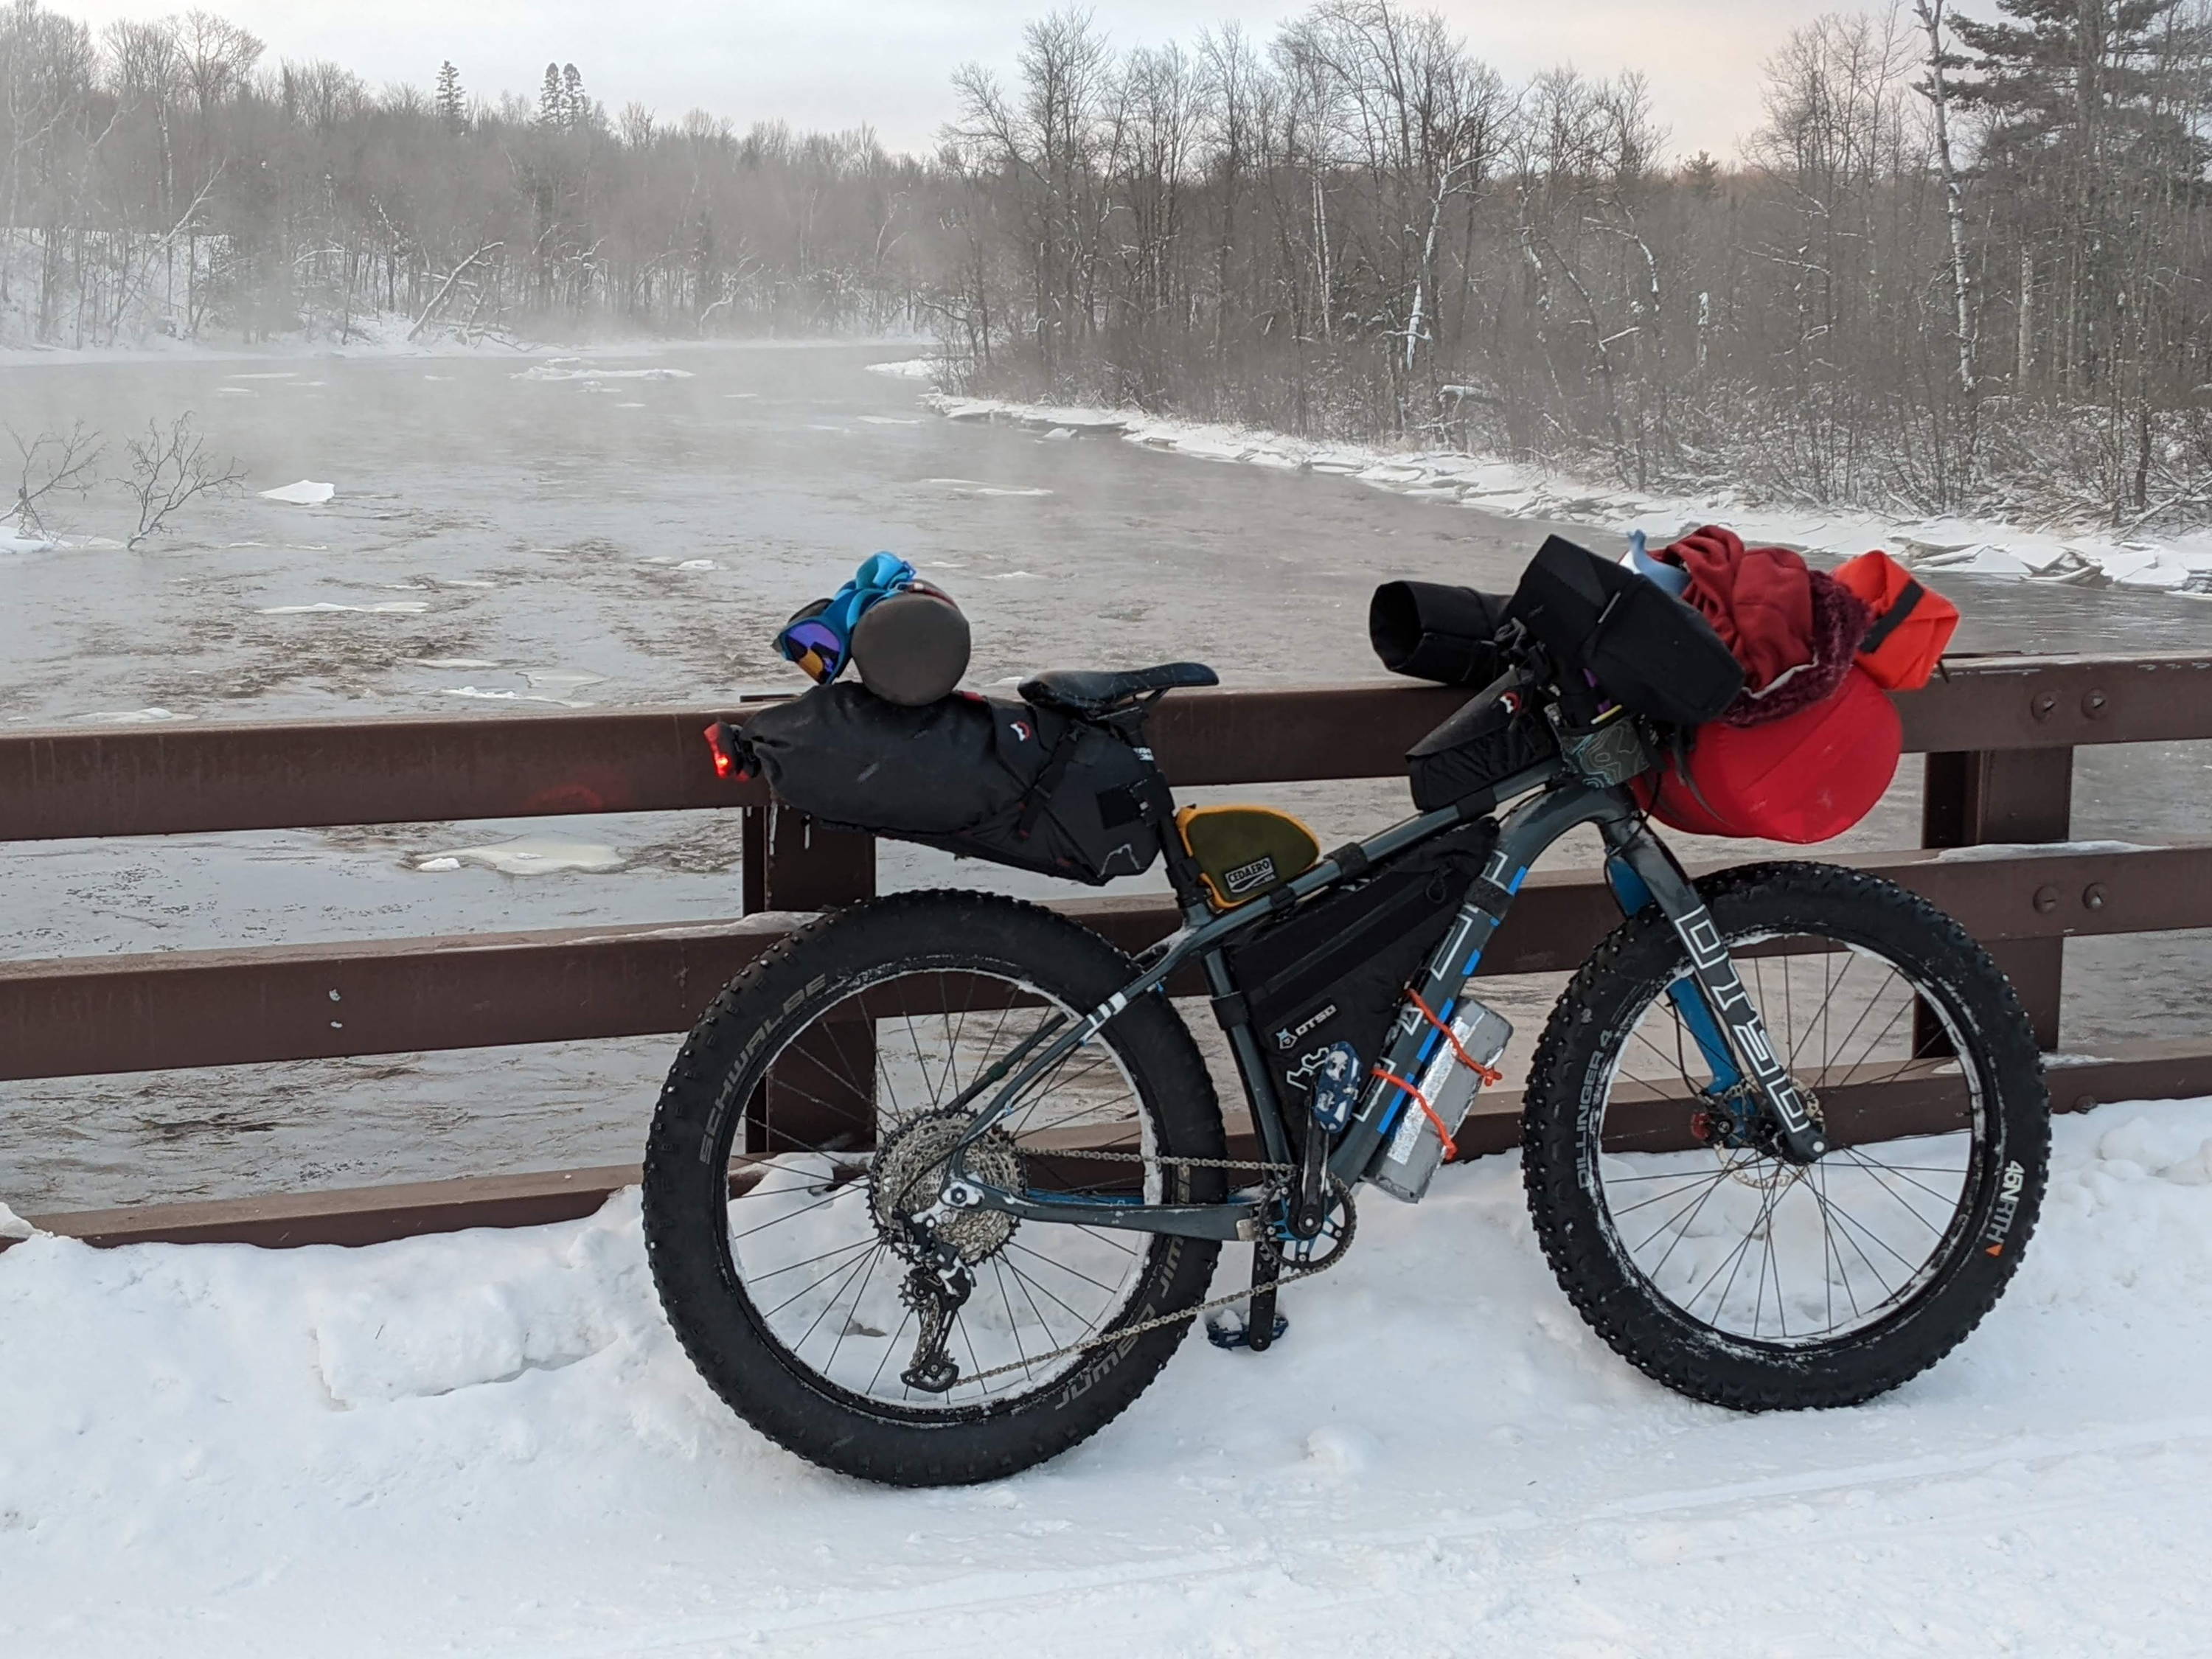 A fully-loaded Otso Voytek leans against a metal bridge railing while a winter river steams in the background.